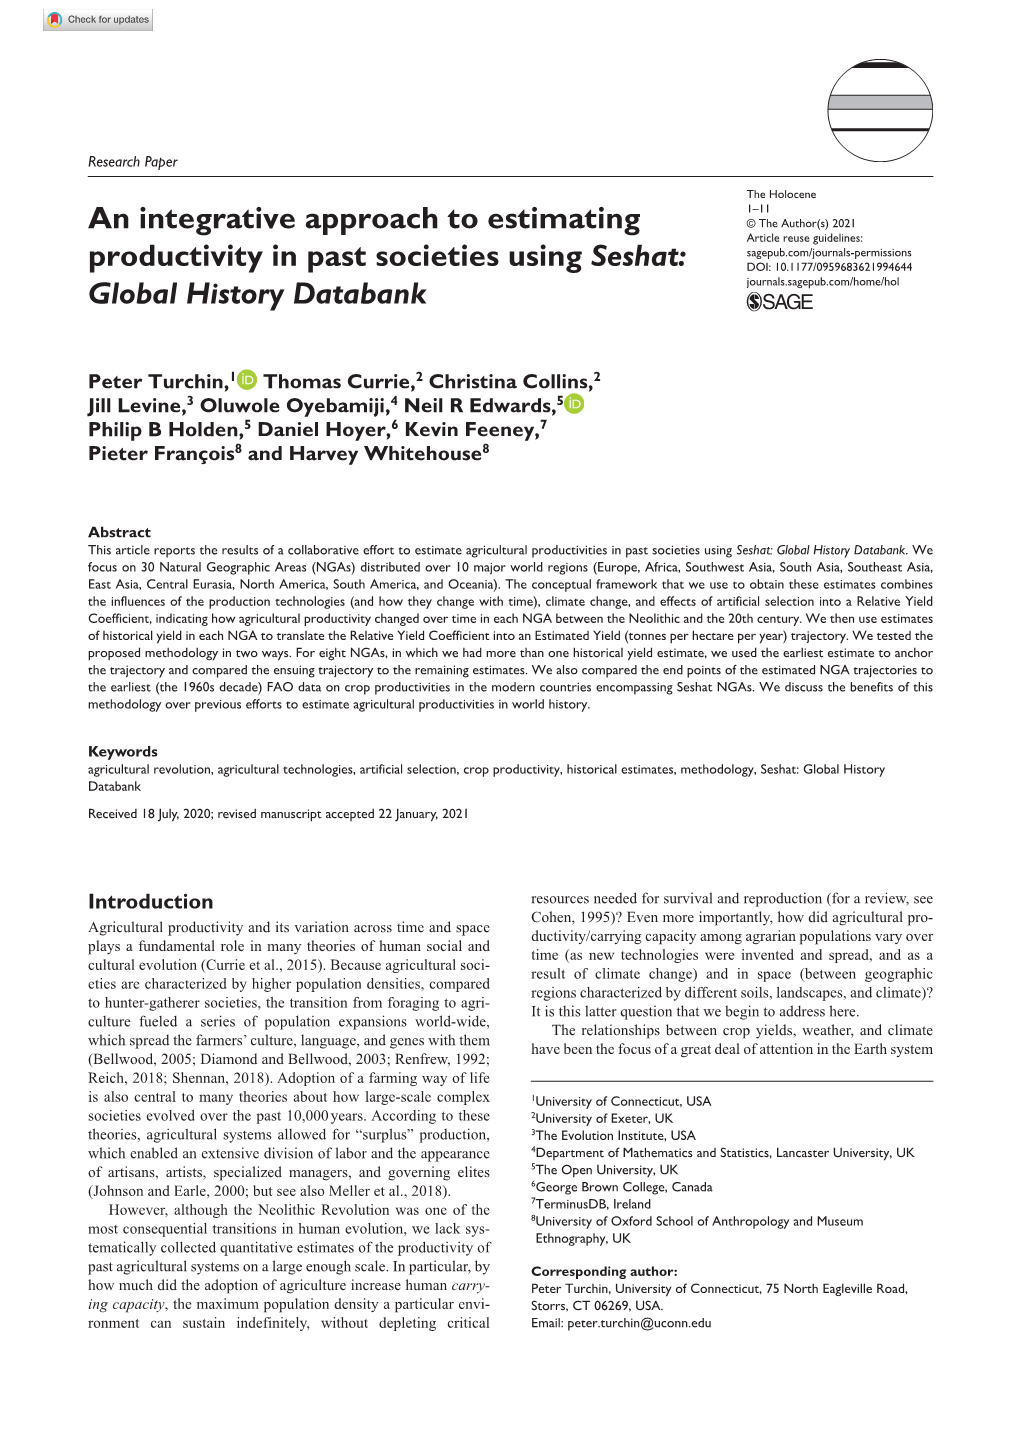 An Integrative Approach to Estimating Productivity in Past Societies Using